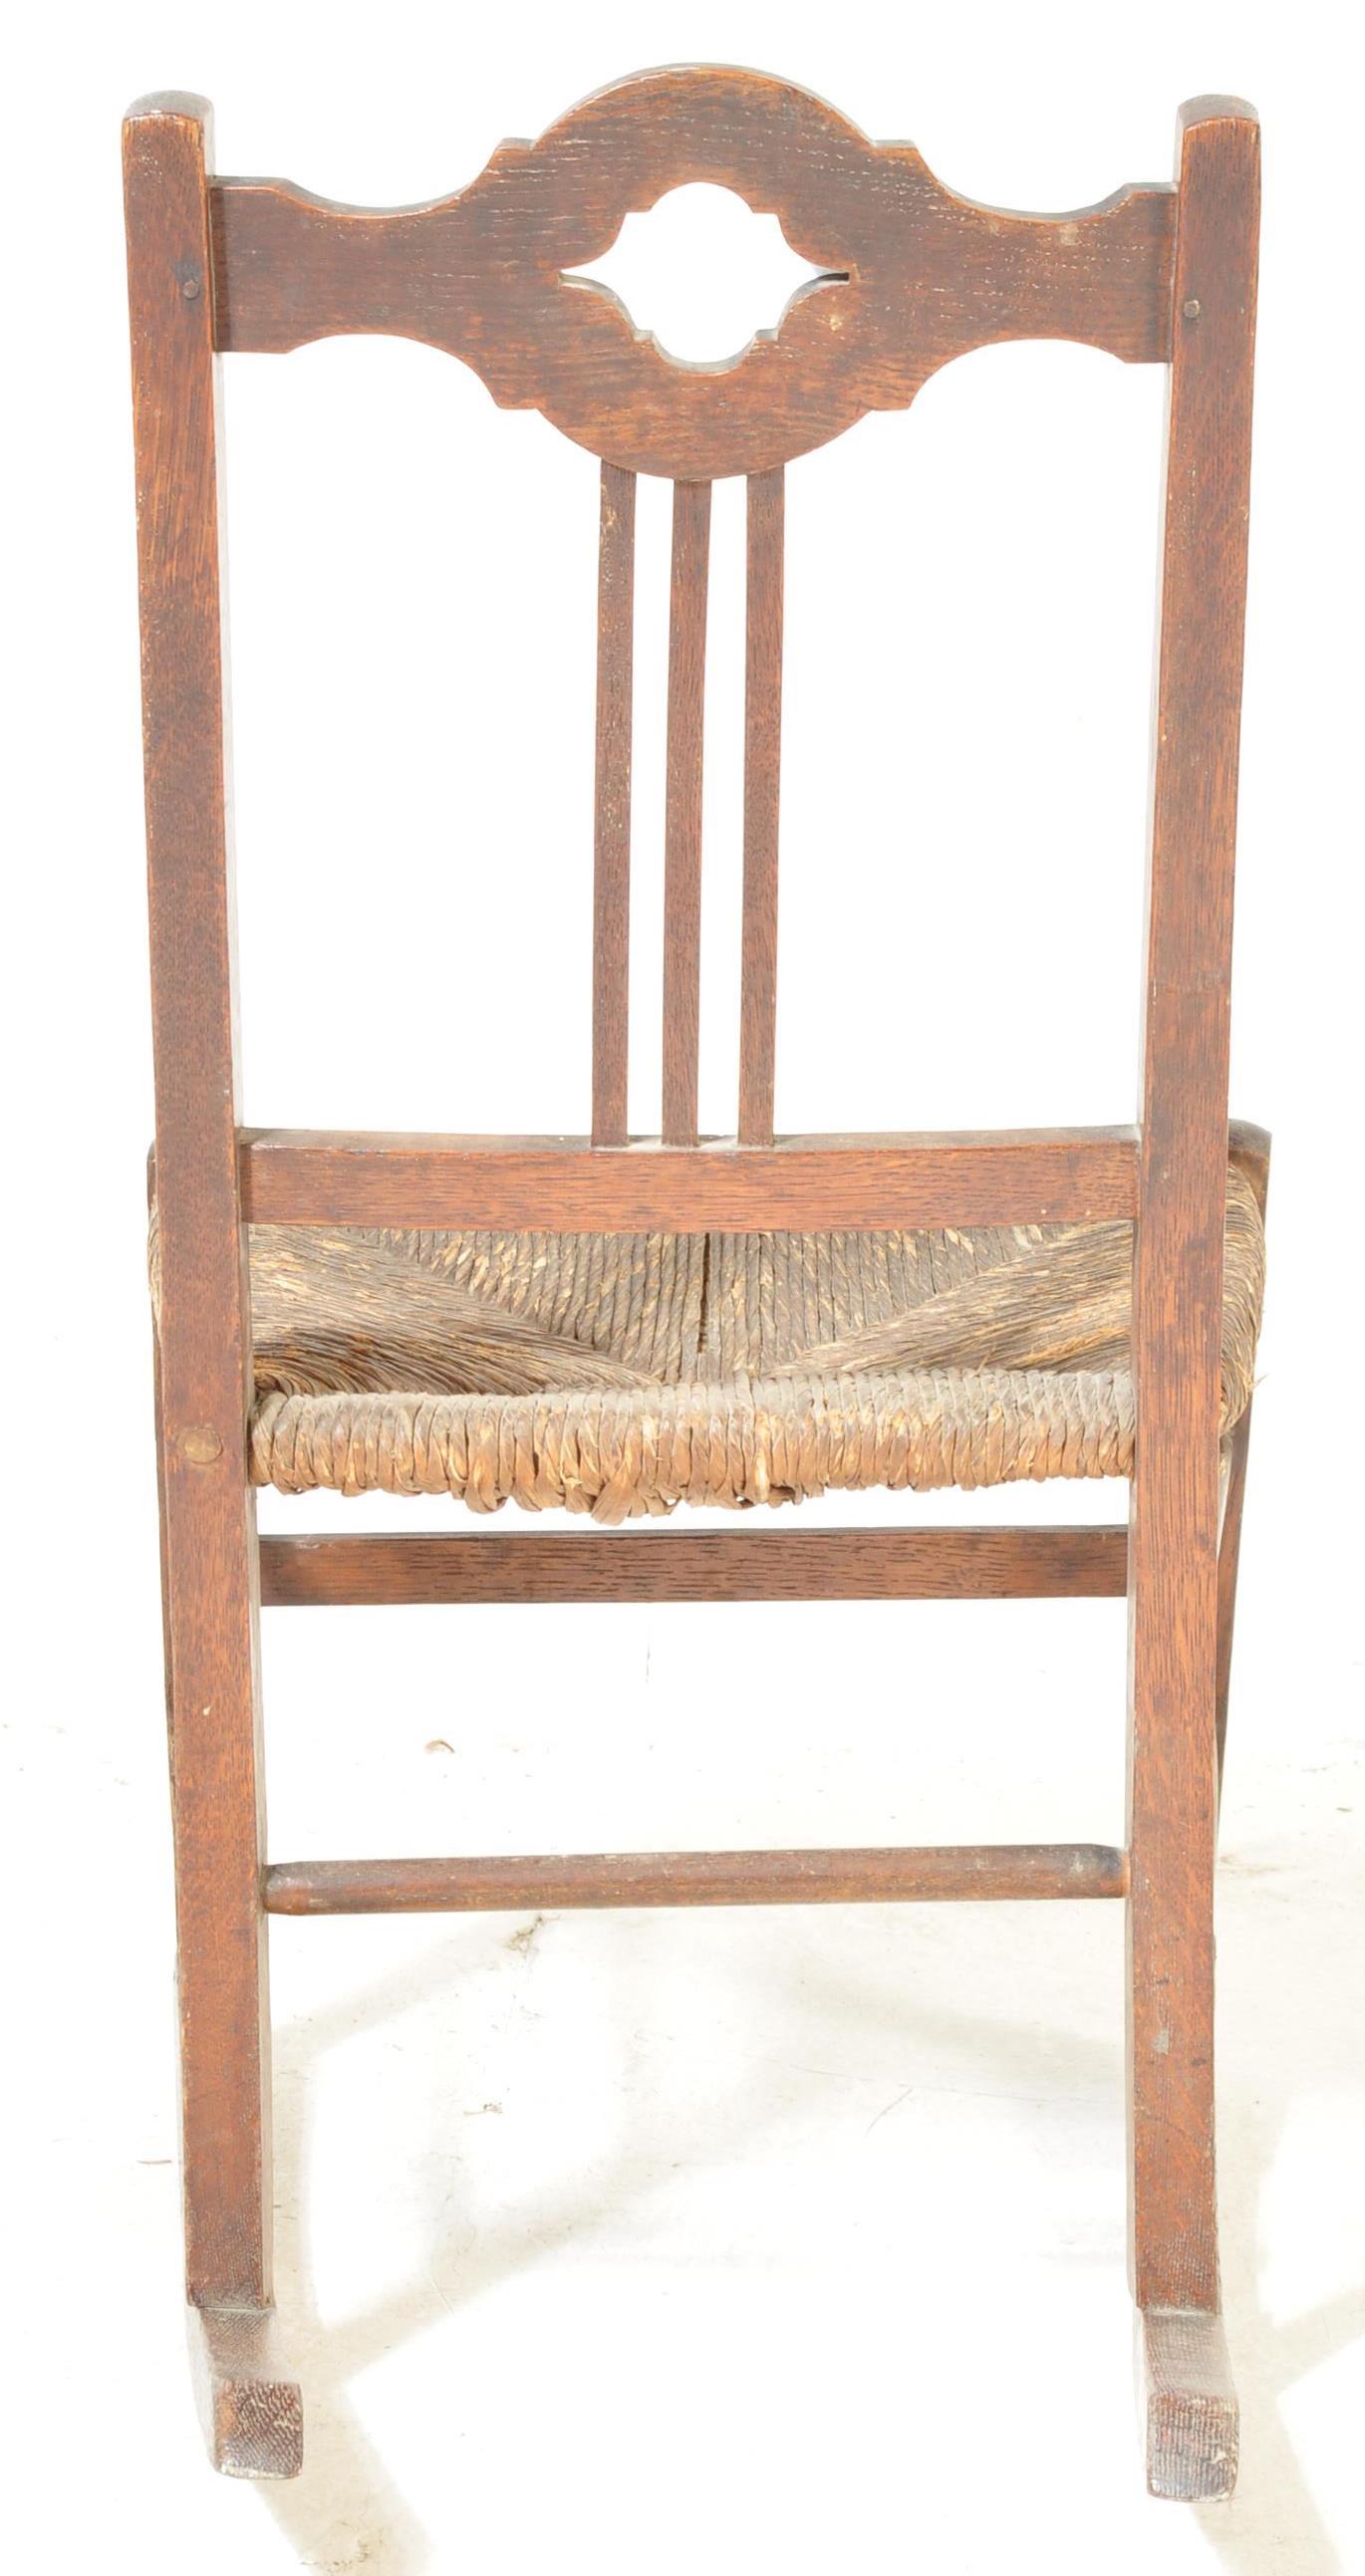 EARLY 20TH CENTURY ARTS & CRAFTS MINATURE ROCKING CHAIR - Image 6 of 6